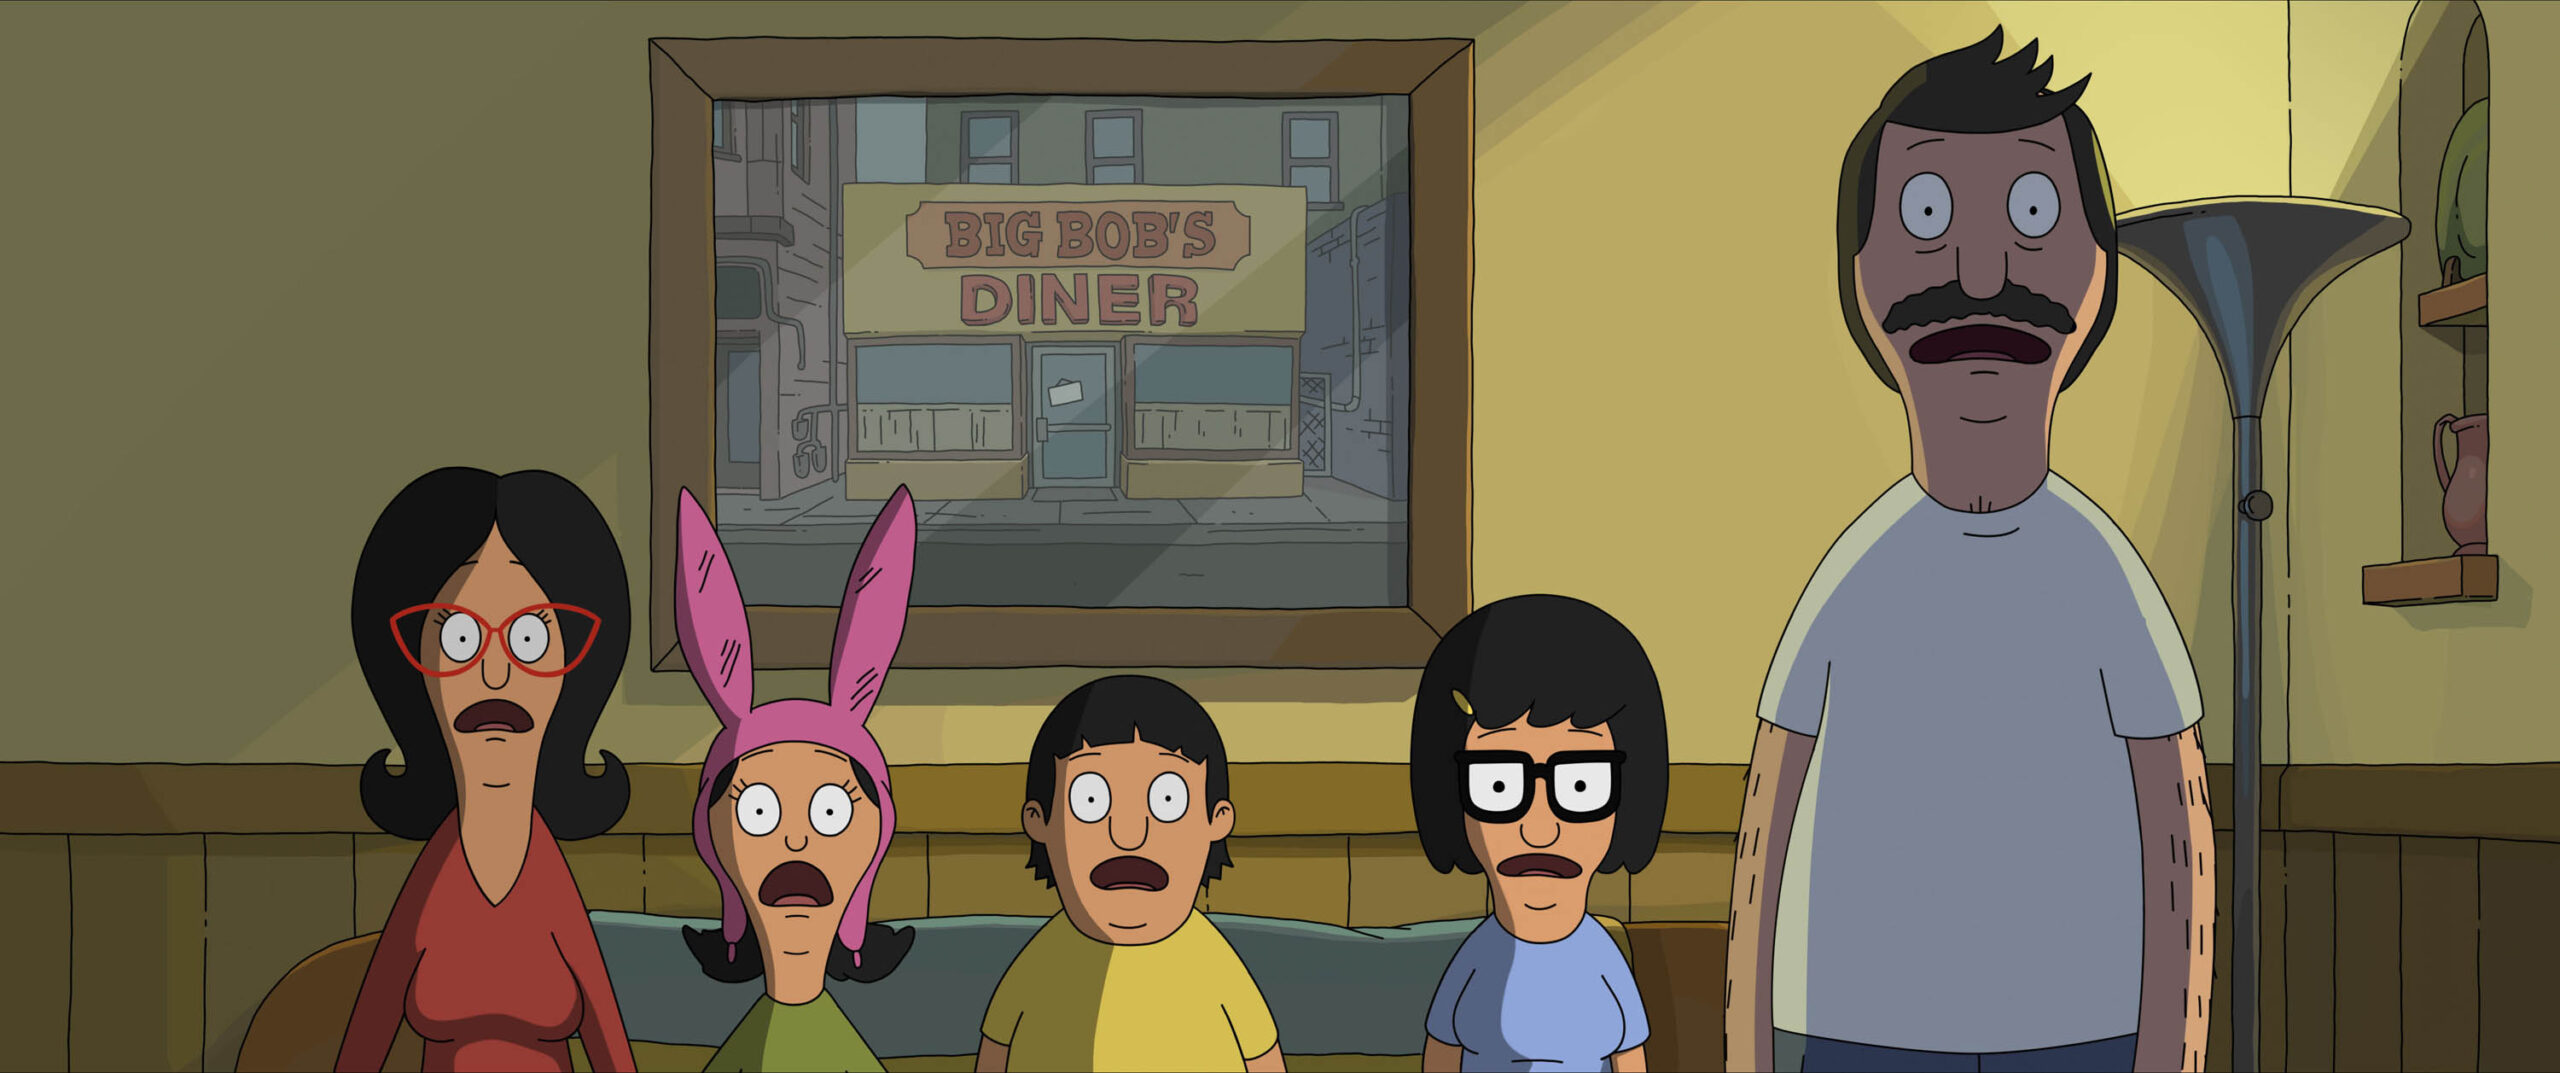 Linda Belcher (voiced by John Roberts), Louise Belcher (voiced by Kristen Schaal), Gene Belcher (voiced by Eugene Mirman), Tina Belcher (voiced by Dan Mintz), and Bob Belcher (voiced by H. Jon Benjamin) in Bob's Burgers - Il Film di 20th Century Studios [credit: courtesy of 20th Century Studios. Copyright 2022 20th Century Studios. All Rights Reserved]